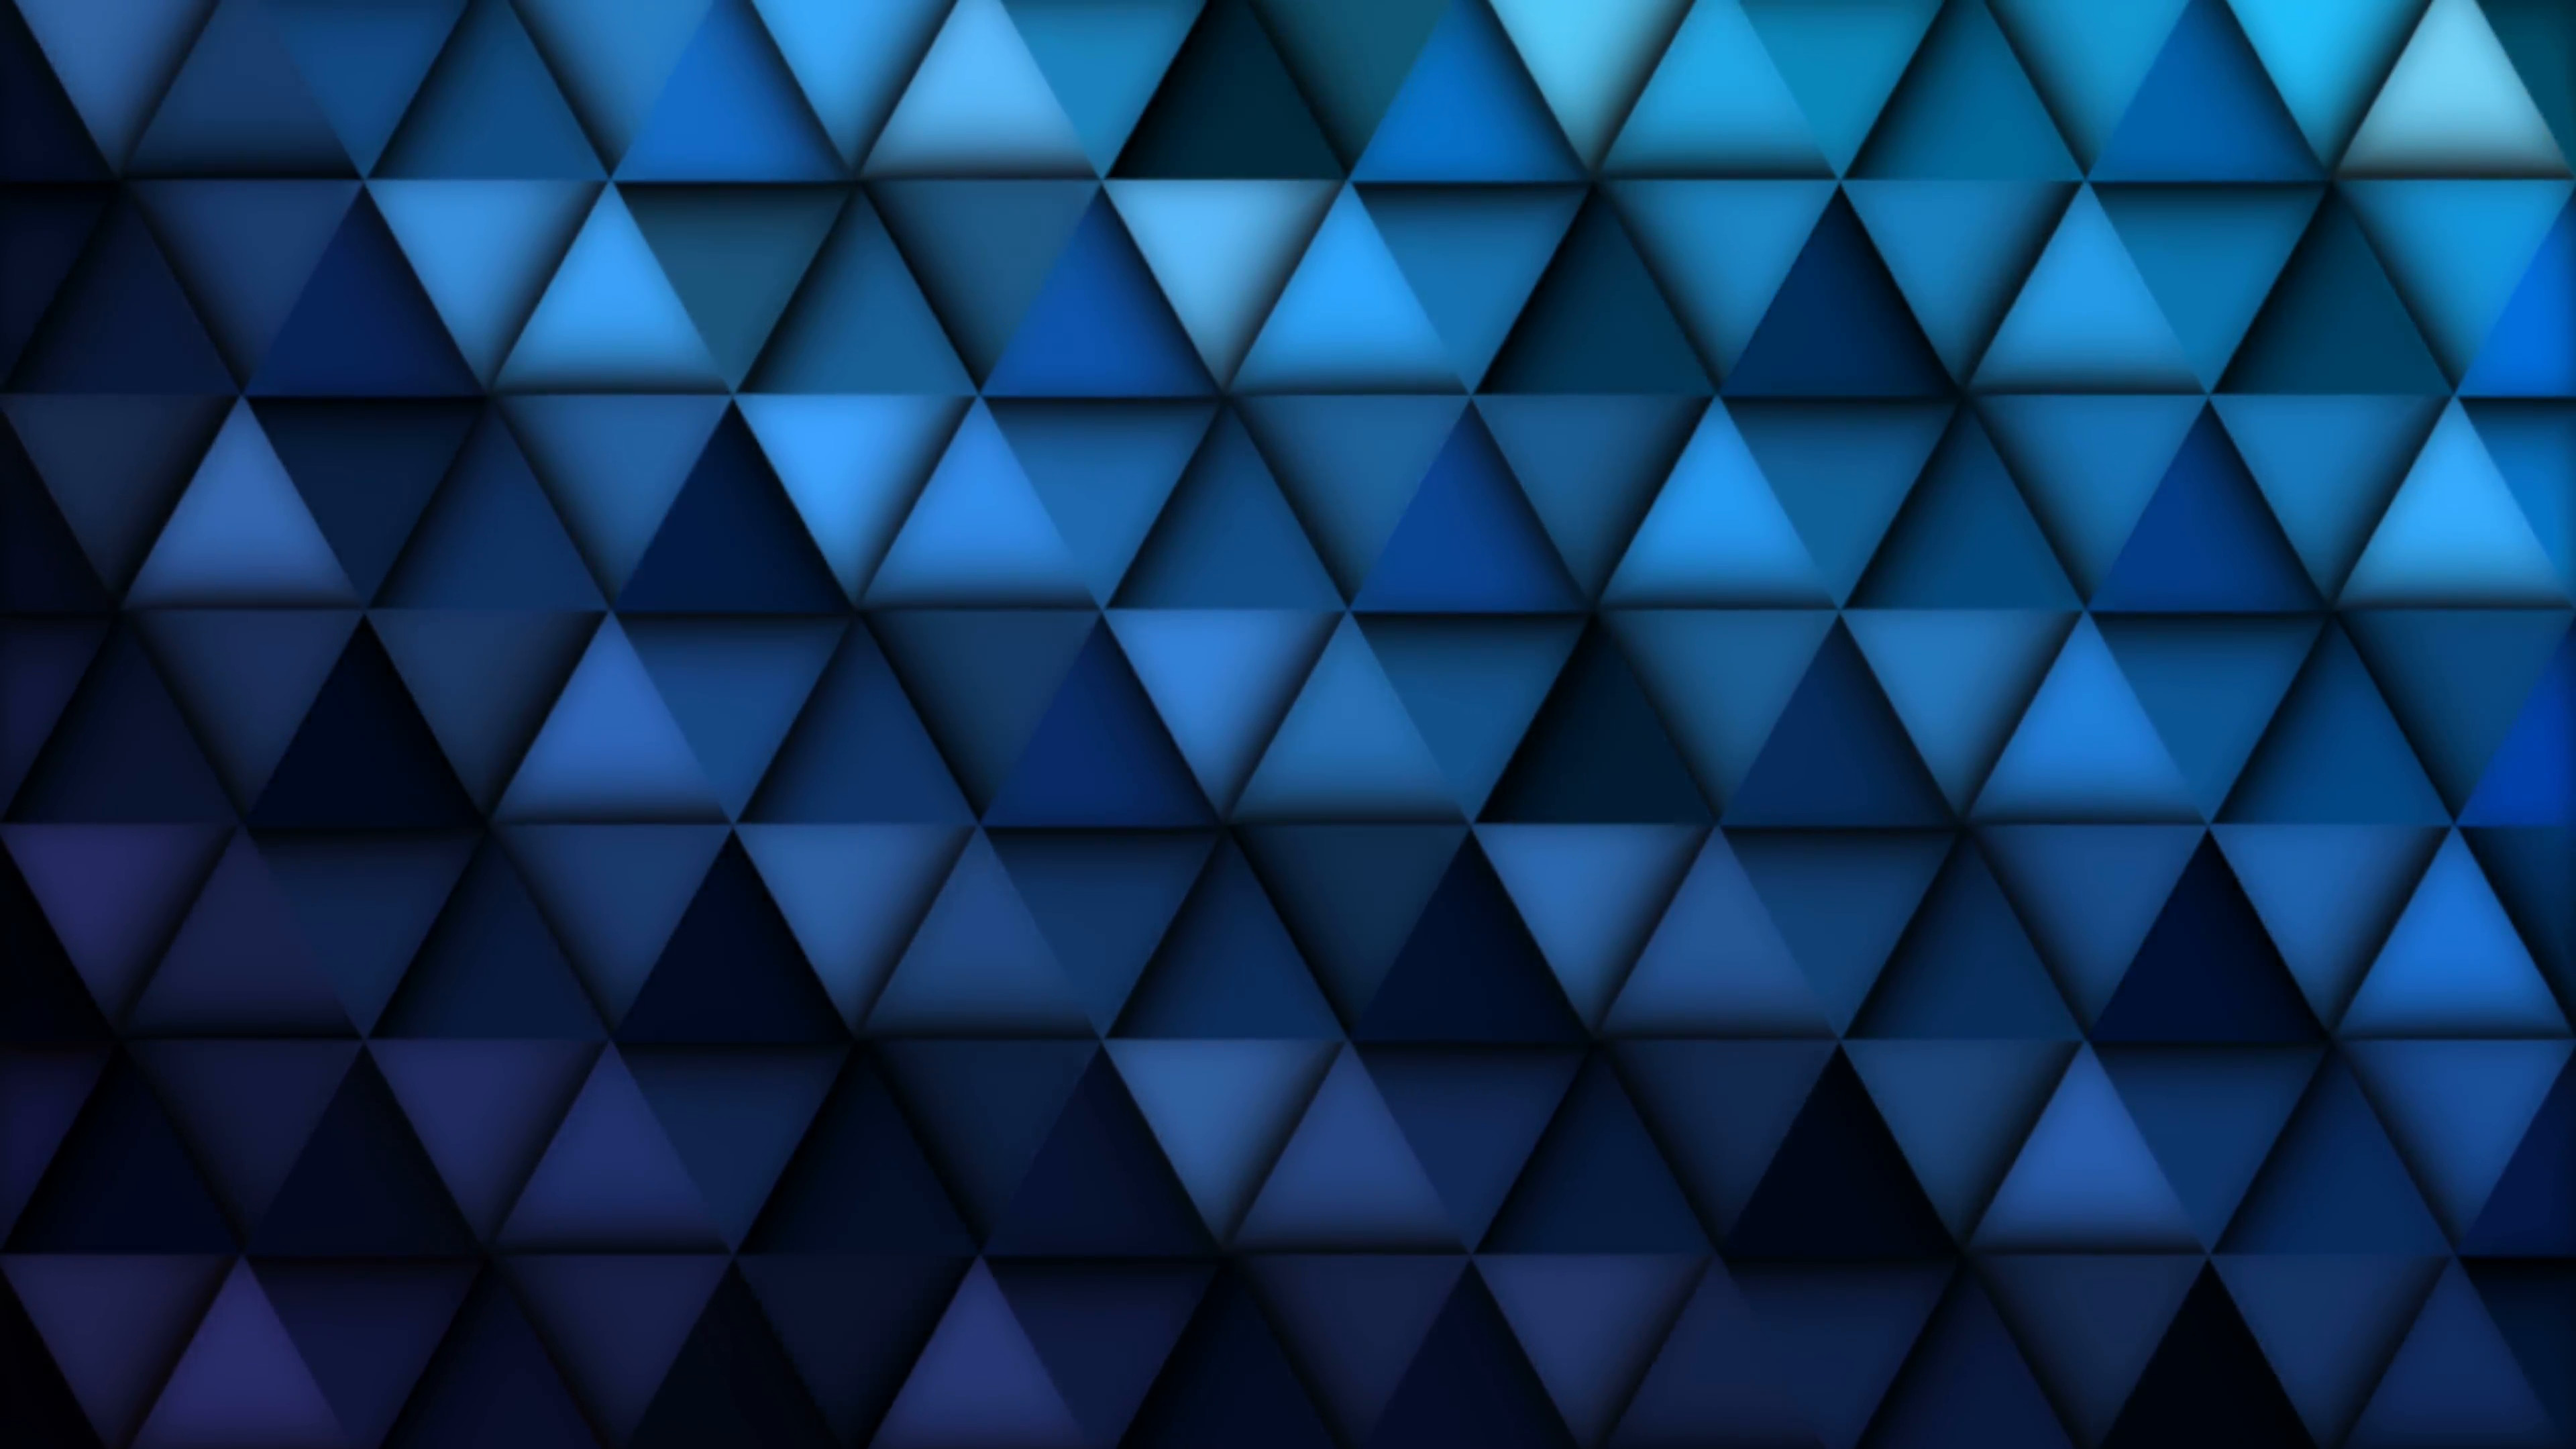 3840x2160 Subscription Library Blue geometric abstract background animation. 4K  resolution. Vertical movement.